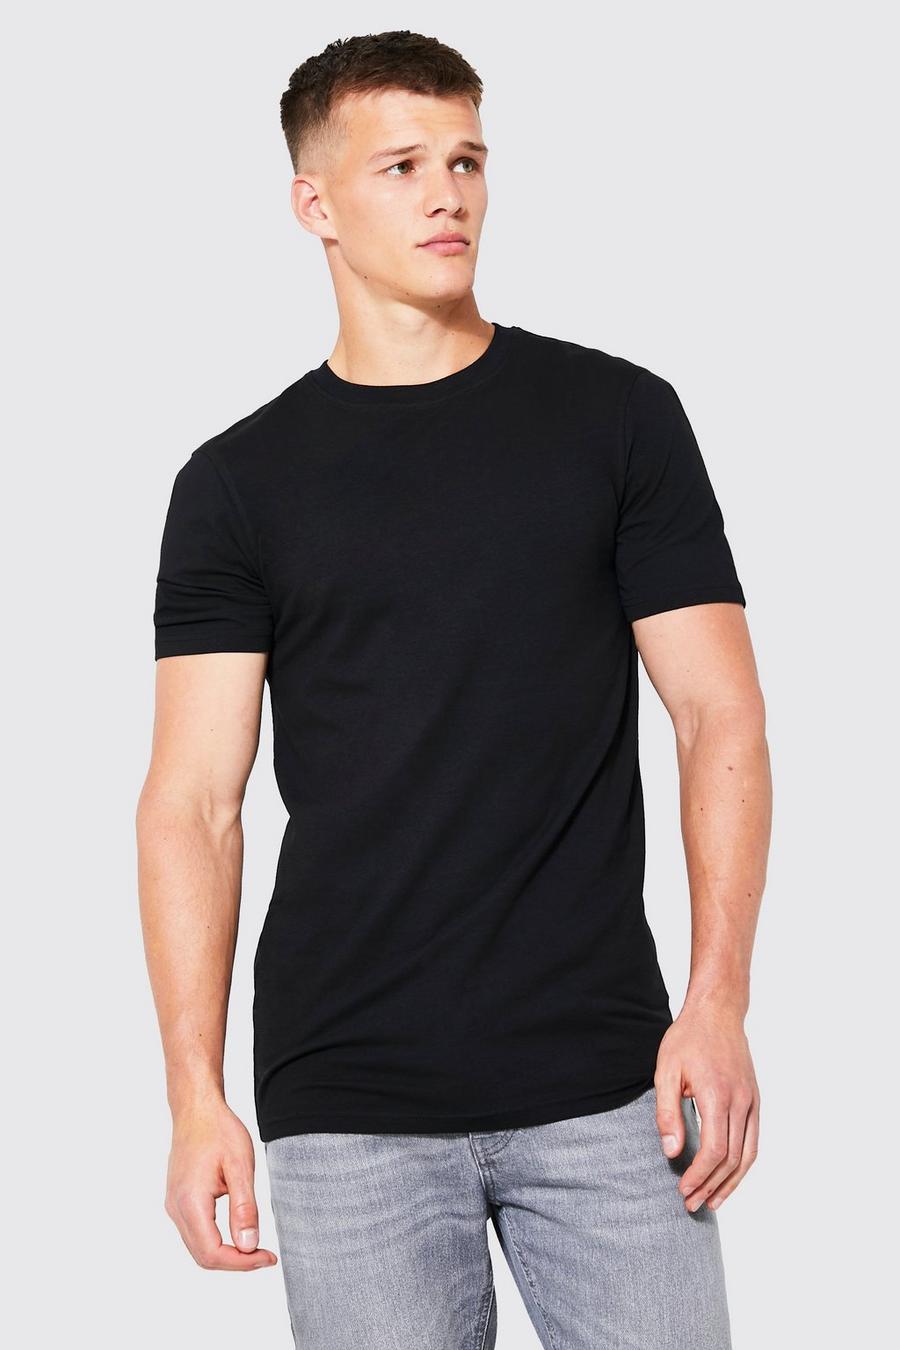 Black Tall Muscle Fit Basic Crew Neck T-shirt